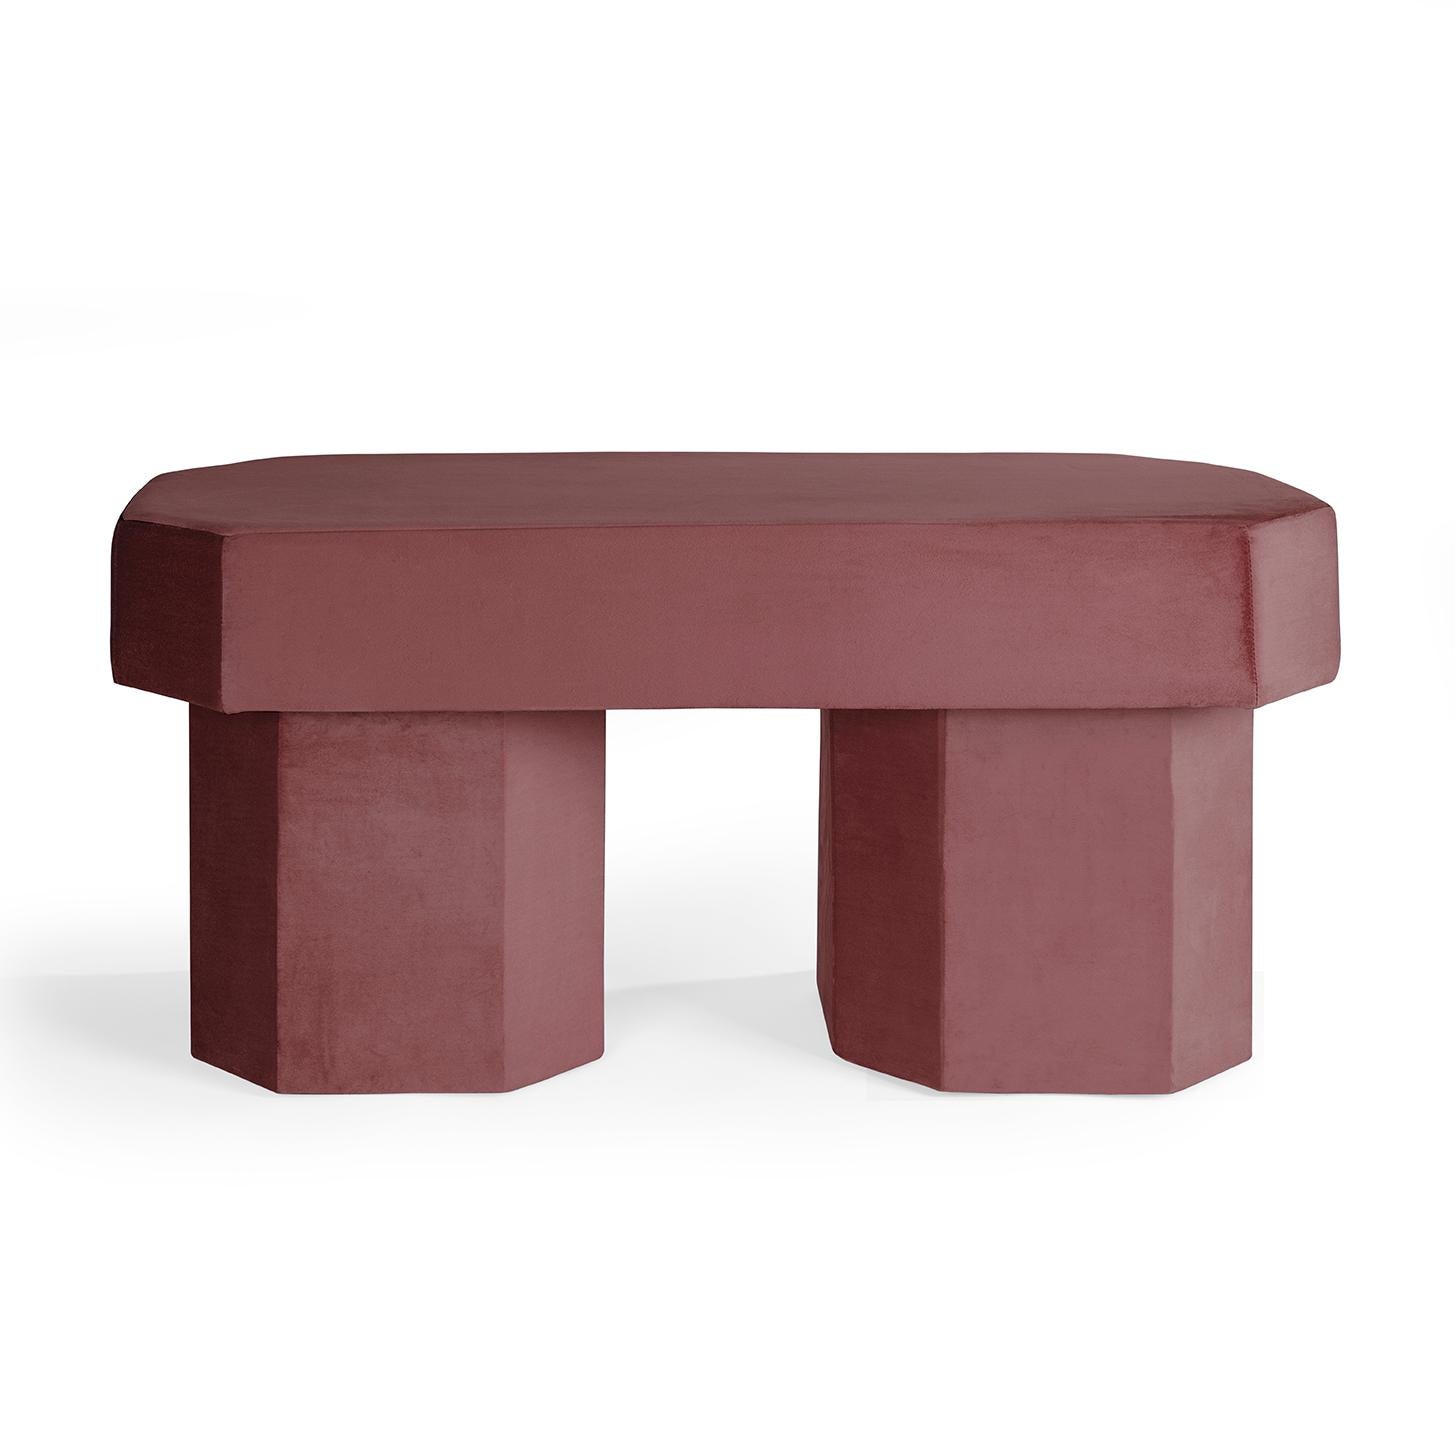 Viva Grana Bench by Houtique
Dimensions: D 100 x W 45 x H 48 cm
Materials: Velvet, Upholstery, Wood
Also available in different colours. Please contact us.

VIVA BENCH.
Designed by Carolina Mico. Made in Spain.
Upholstered bench in flame-retardant